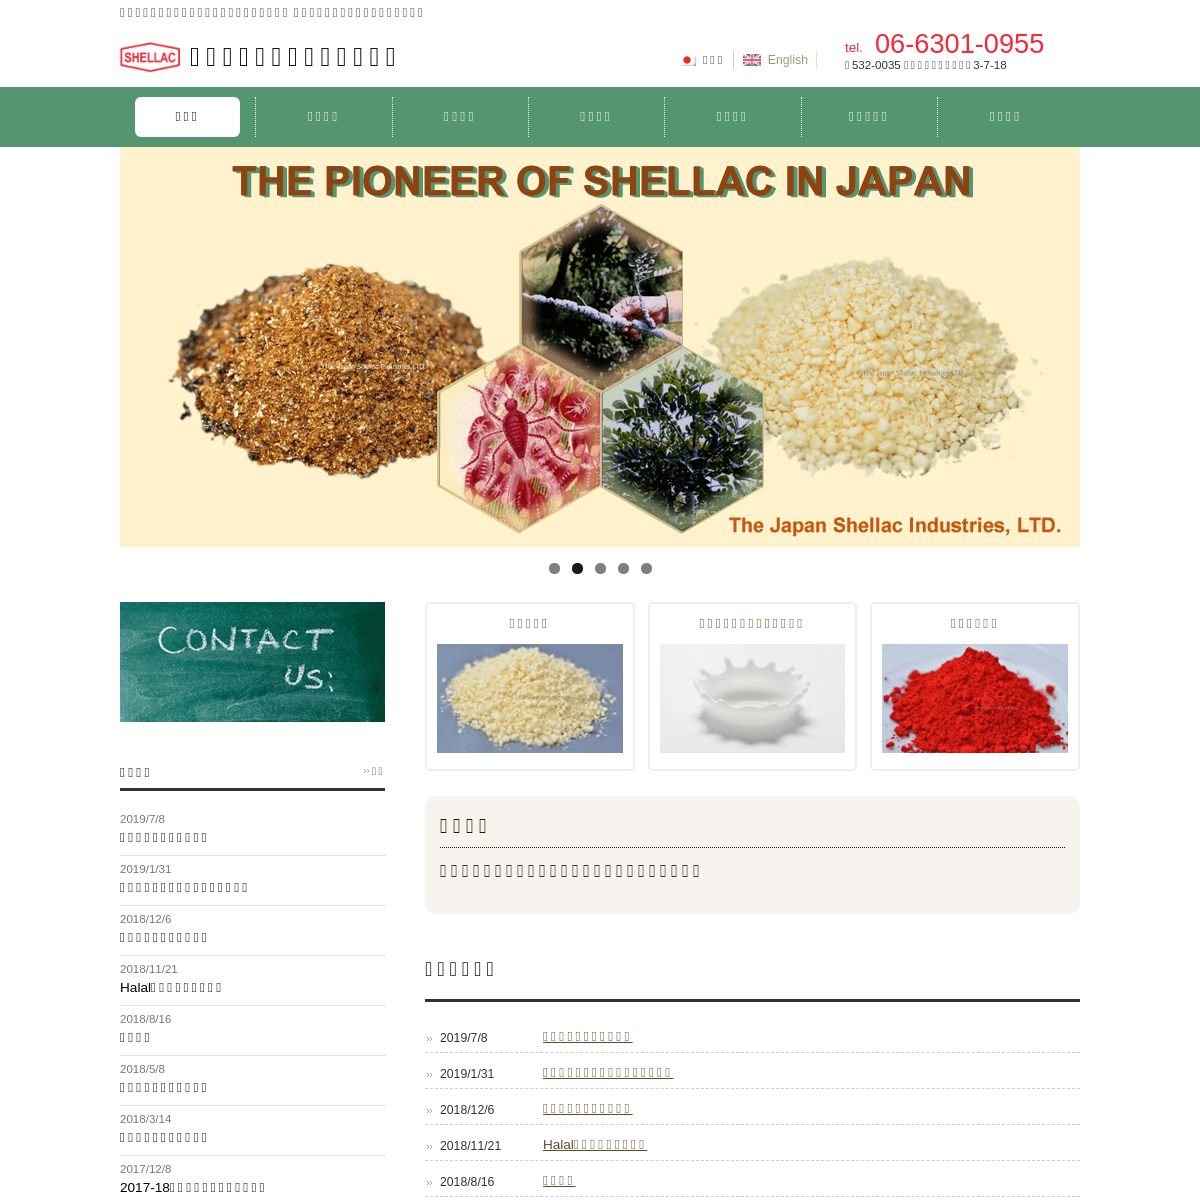 A complete backup of japan-shellac.co.jp